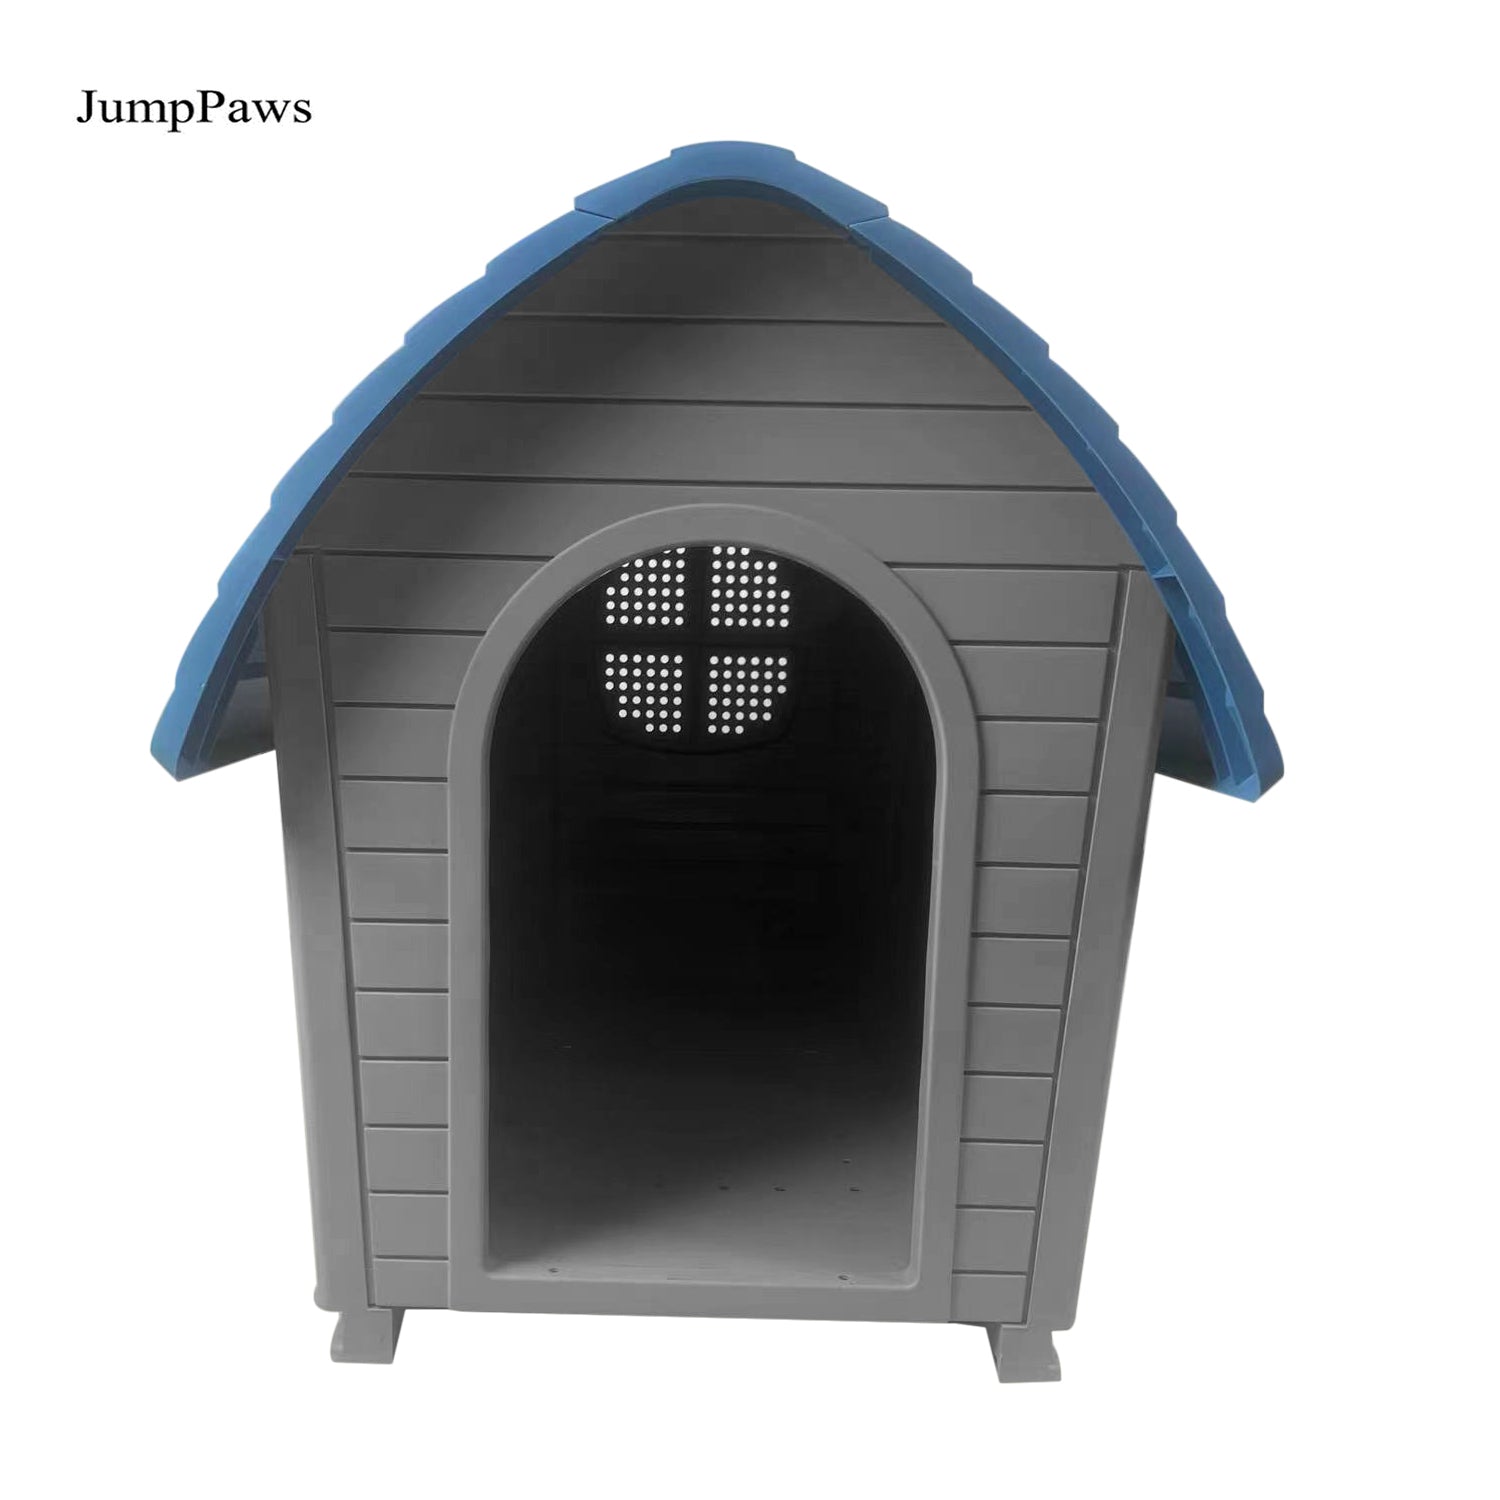 JumpPaws Nesting Boxes for Household Pets, Plastic Dog House for Small Medium Dogs, Grey, 30"D x 24"W x 26"H